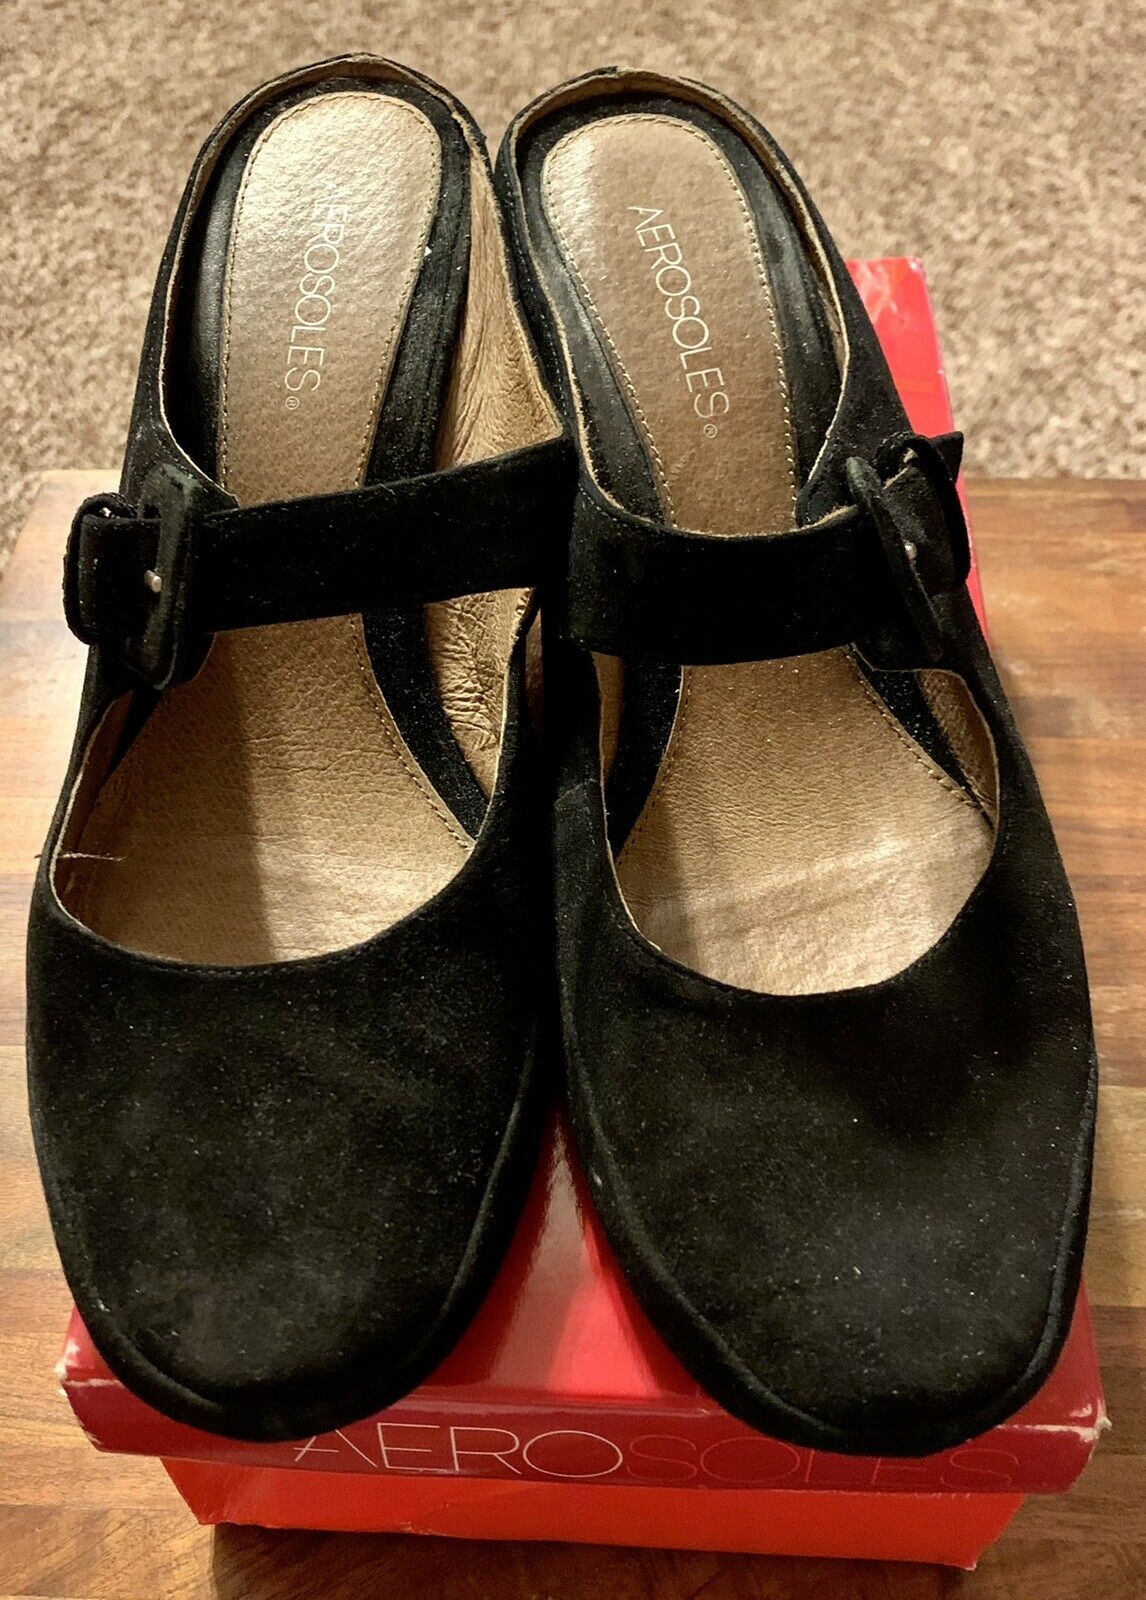 NEW Women’s Aerosoles Wrap It Up Black Suede Embroidered 12 M Shoes Slides Mules